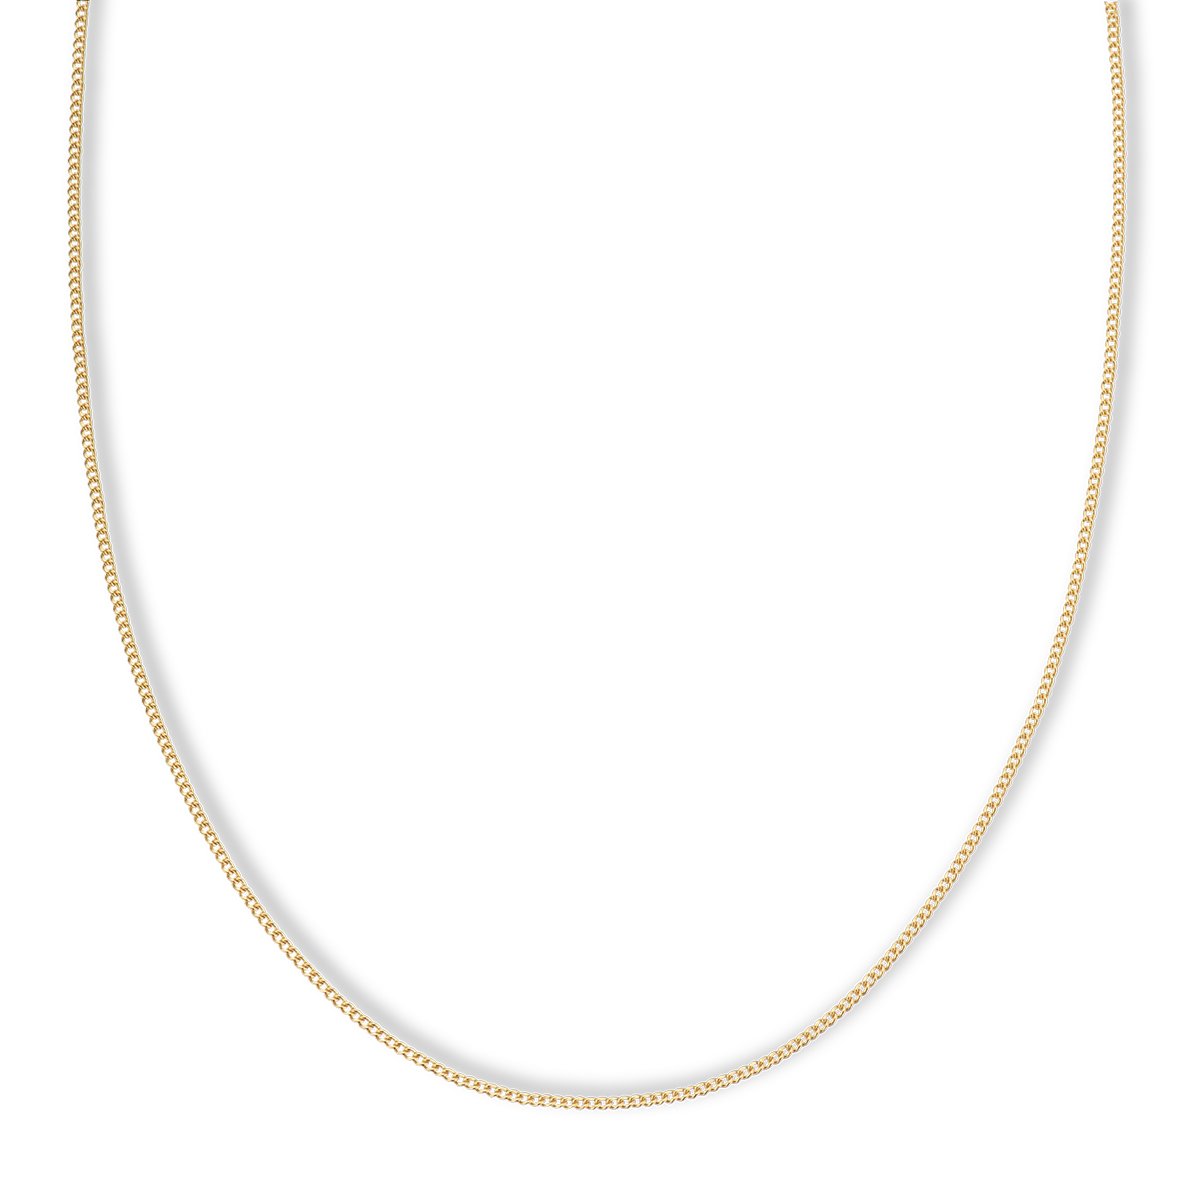 Yellow gold plated chain 45cm